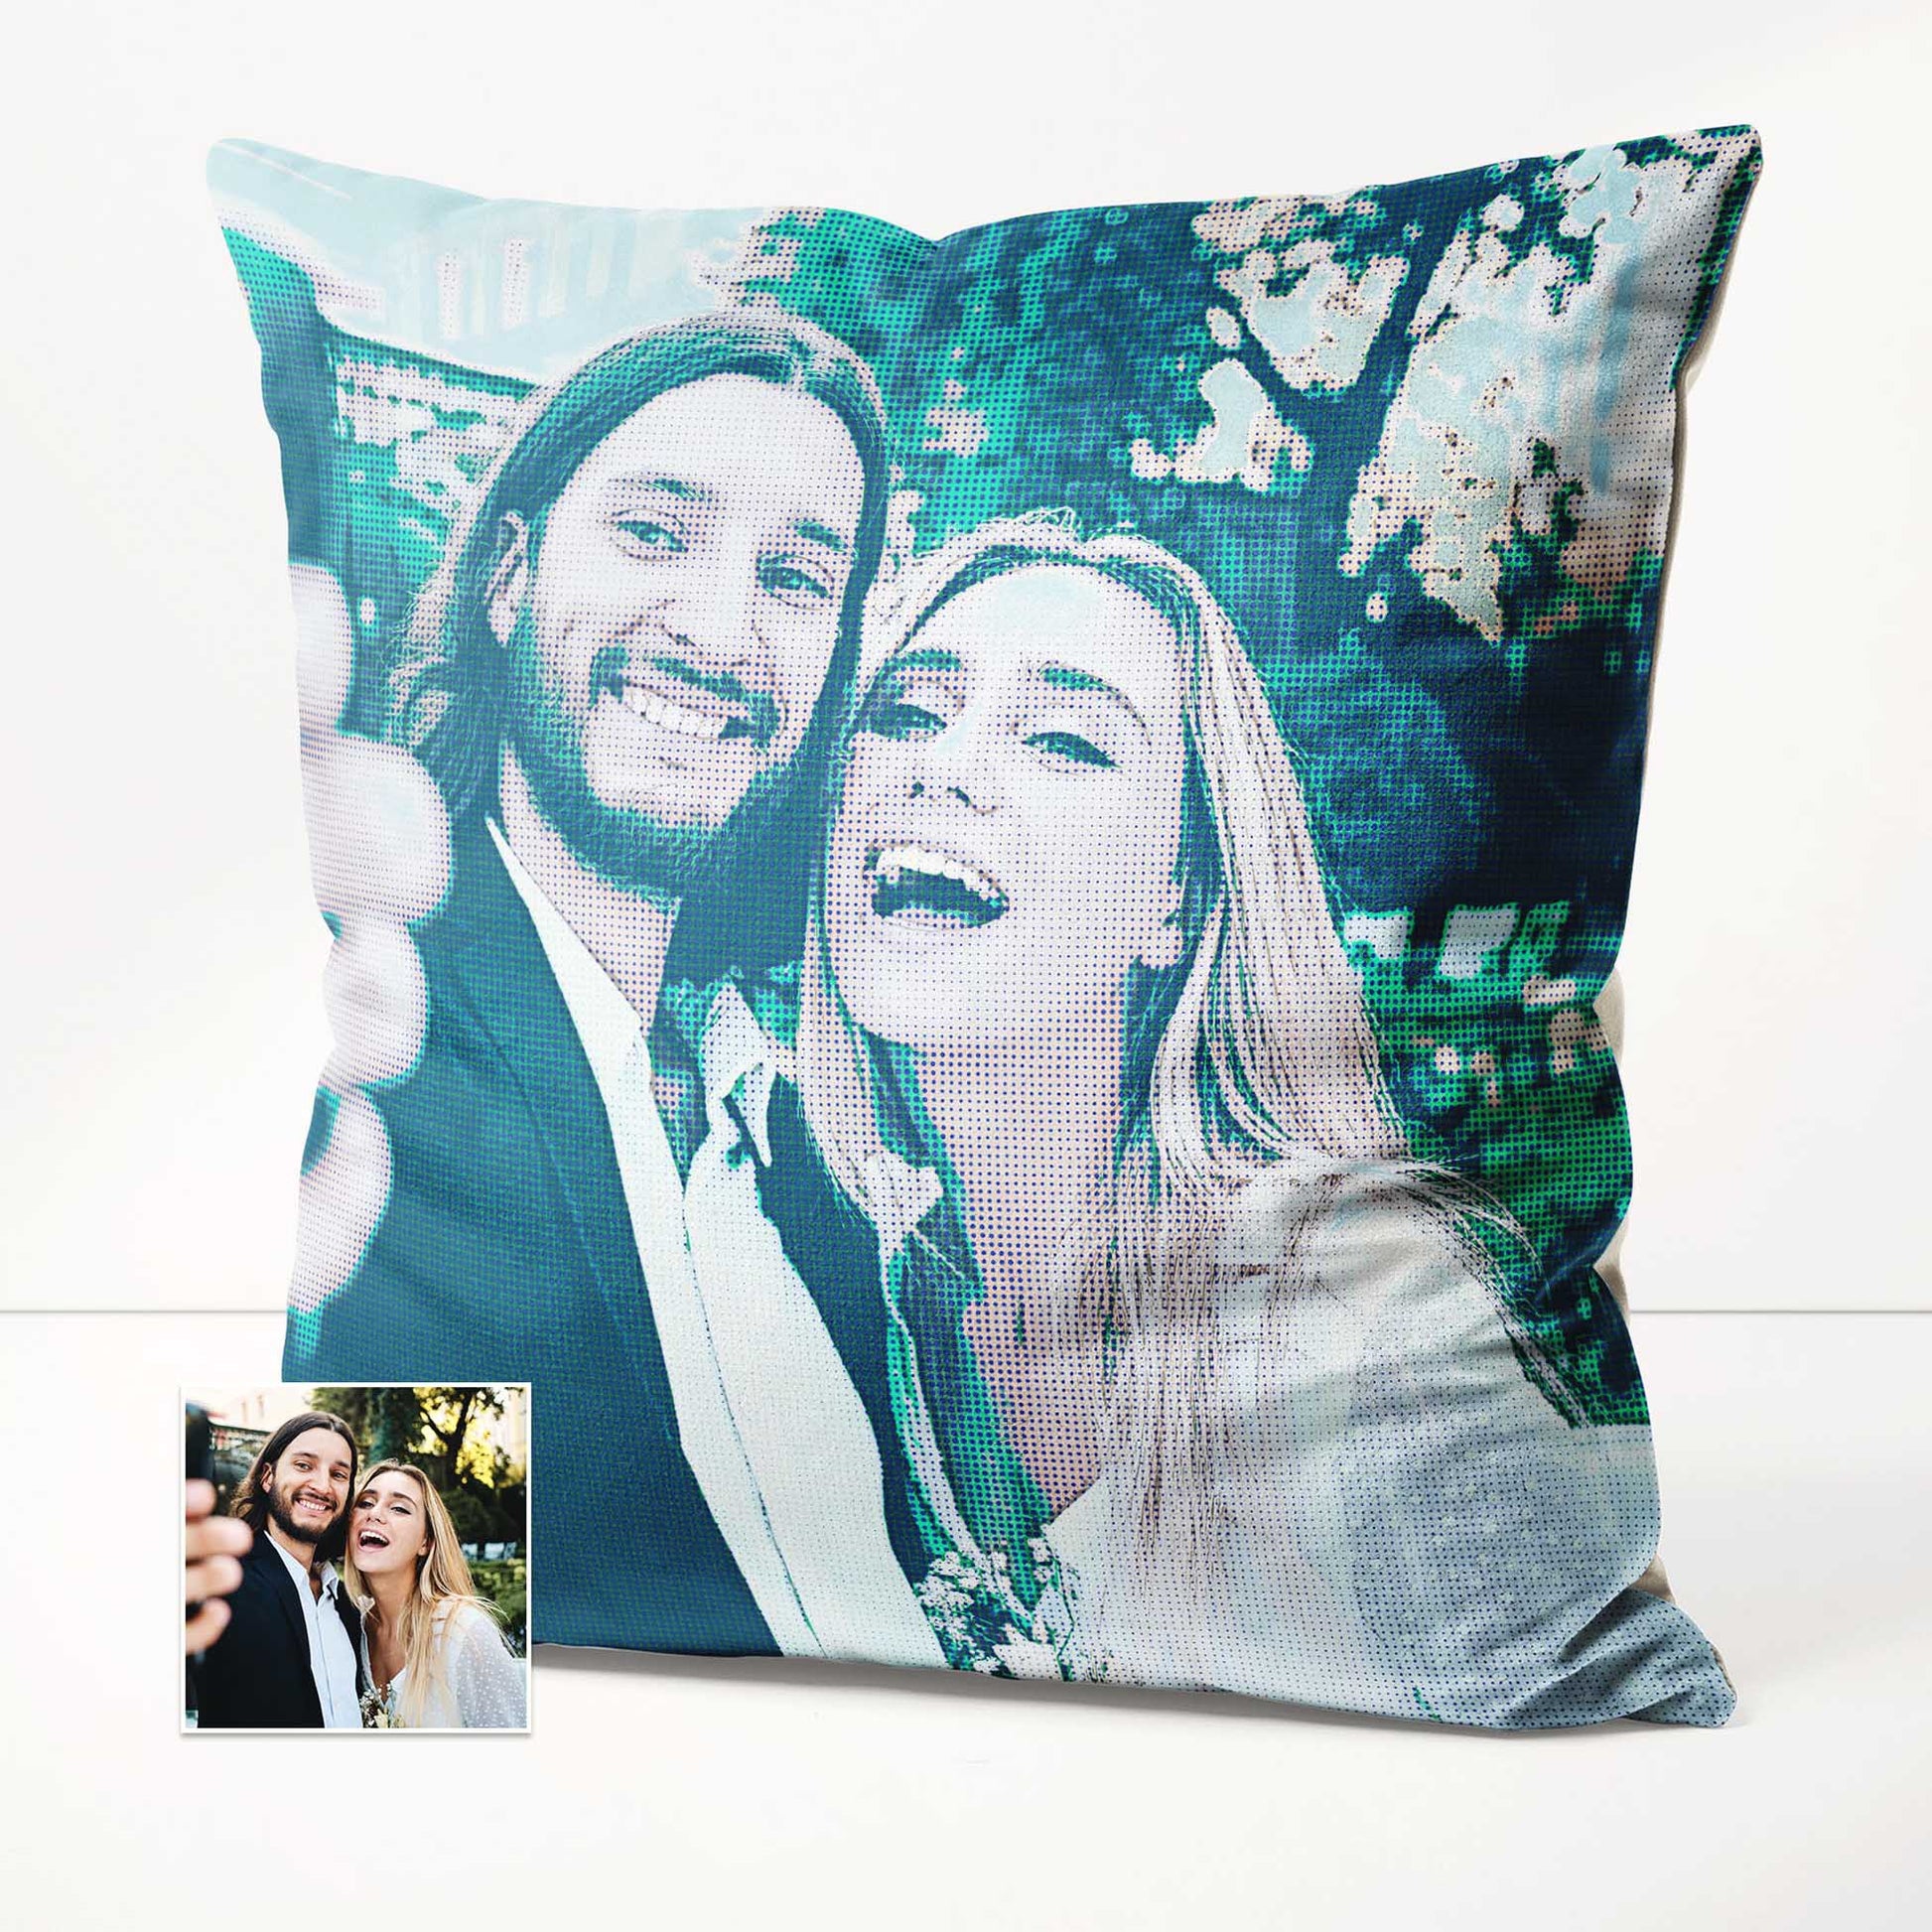 Add a touch of vintage charm to your home with the Personalised Teal Grunge Cushion. This cushion is custom printed from your photo, featuring a halftone effect and grunge texture for an old school vibe, handmade